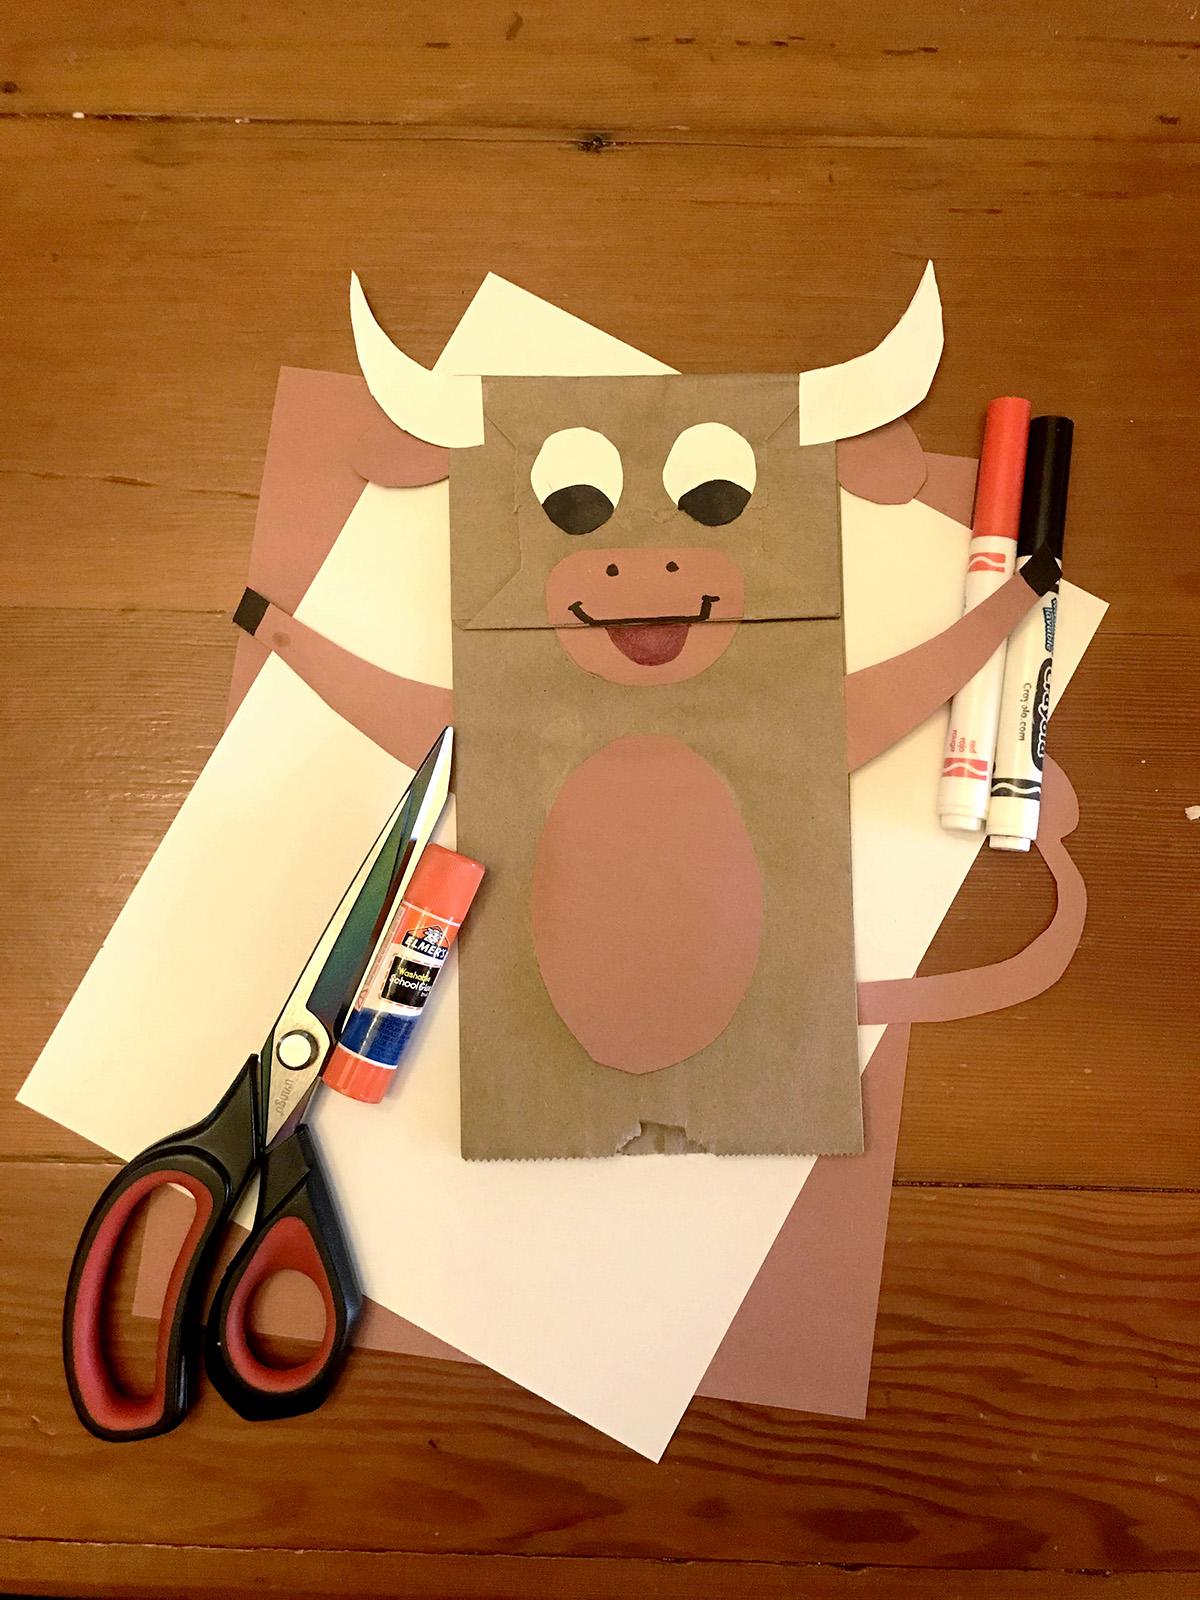 A photograph of a paper bag that looks like an ox.